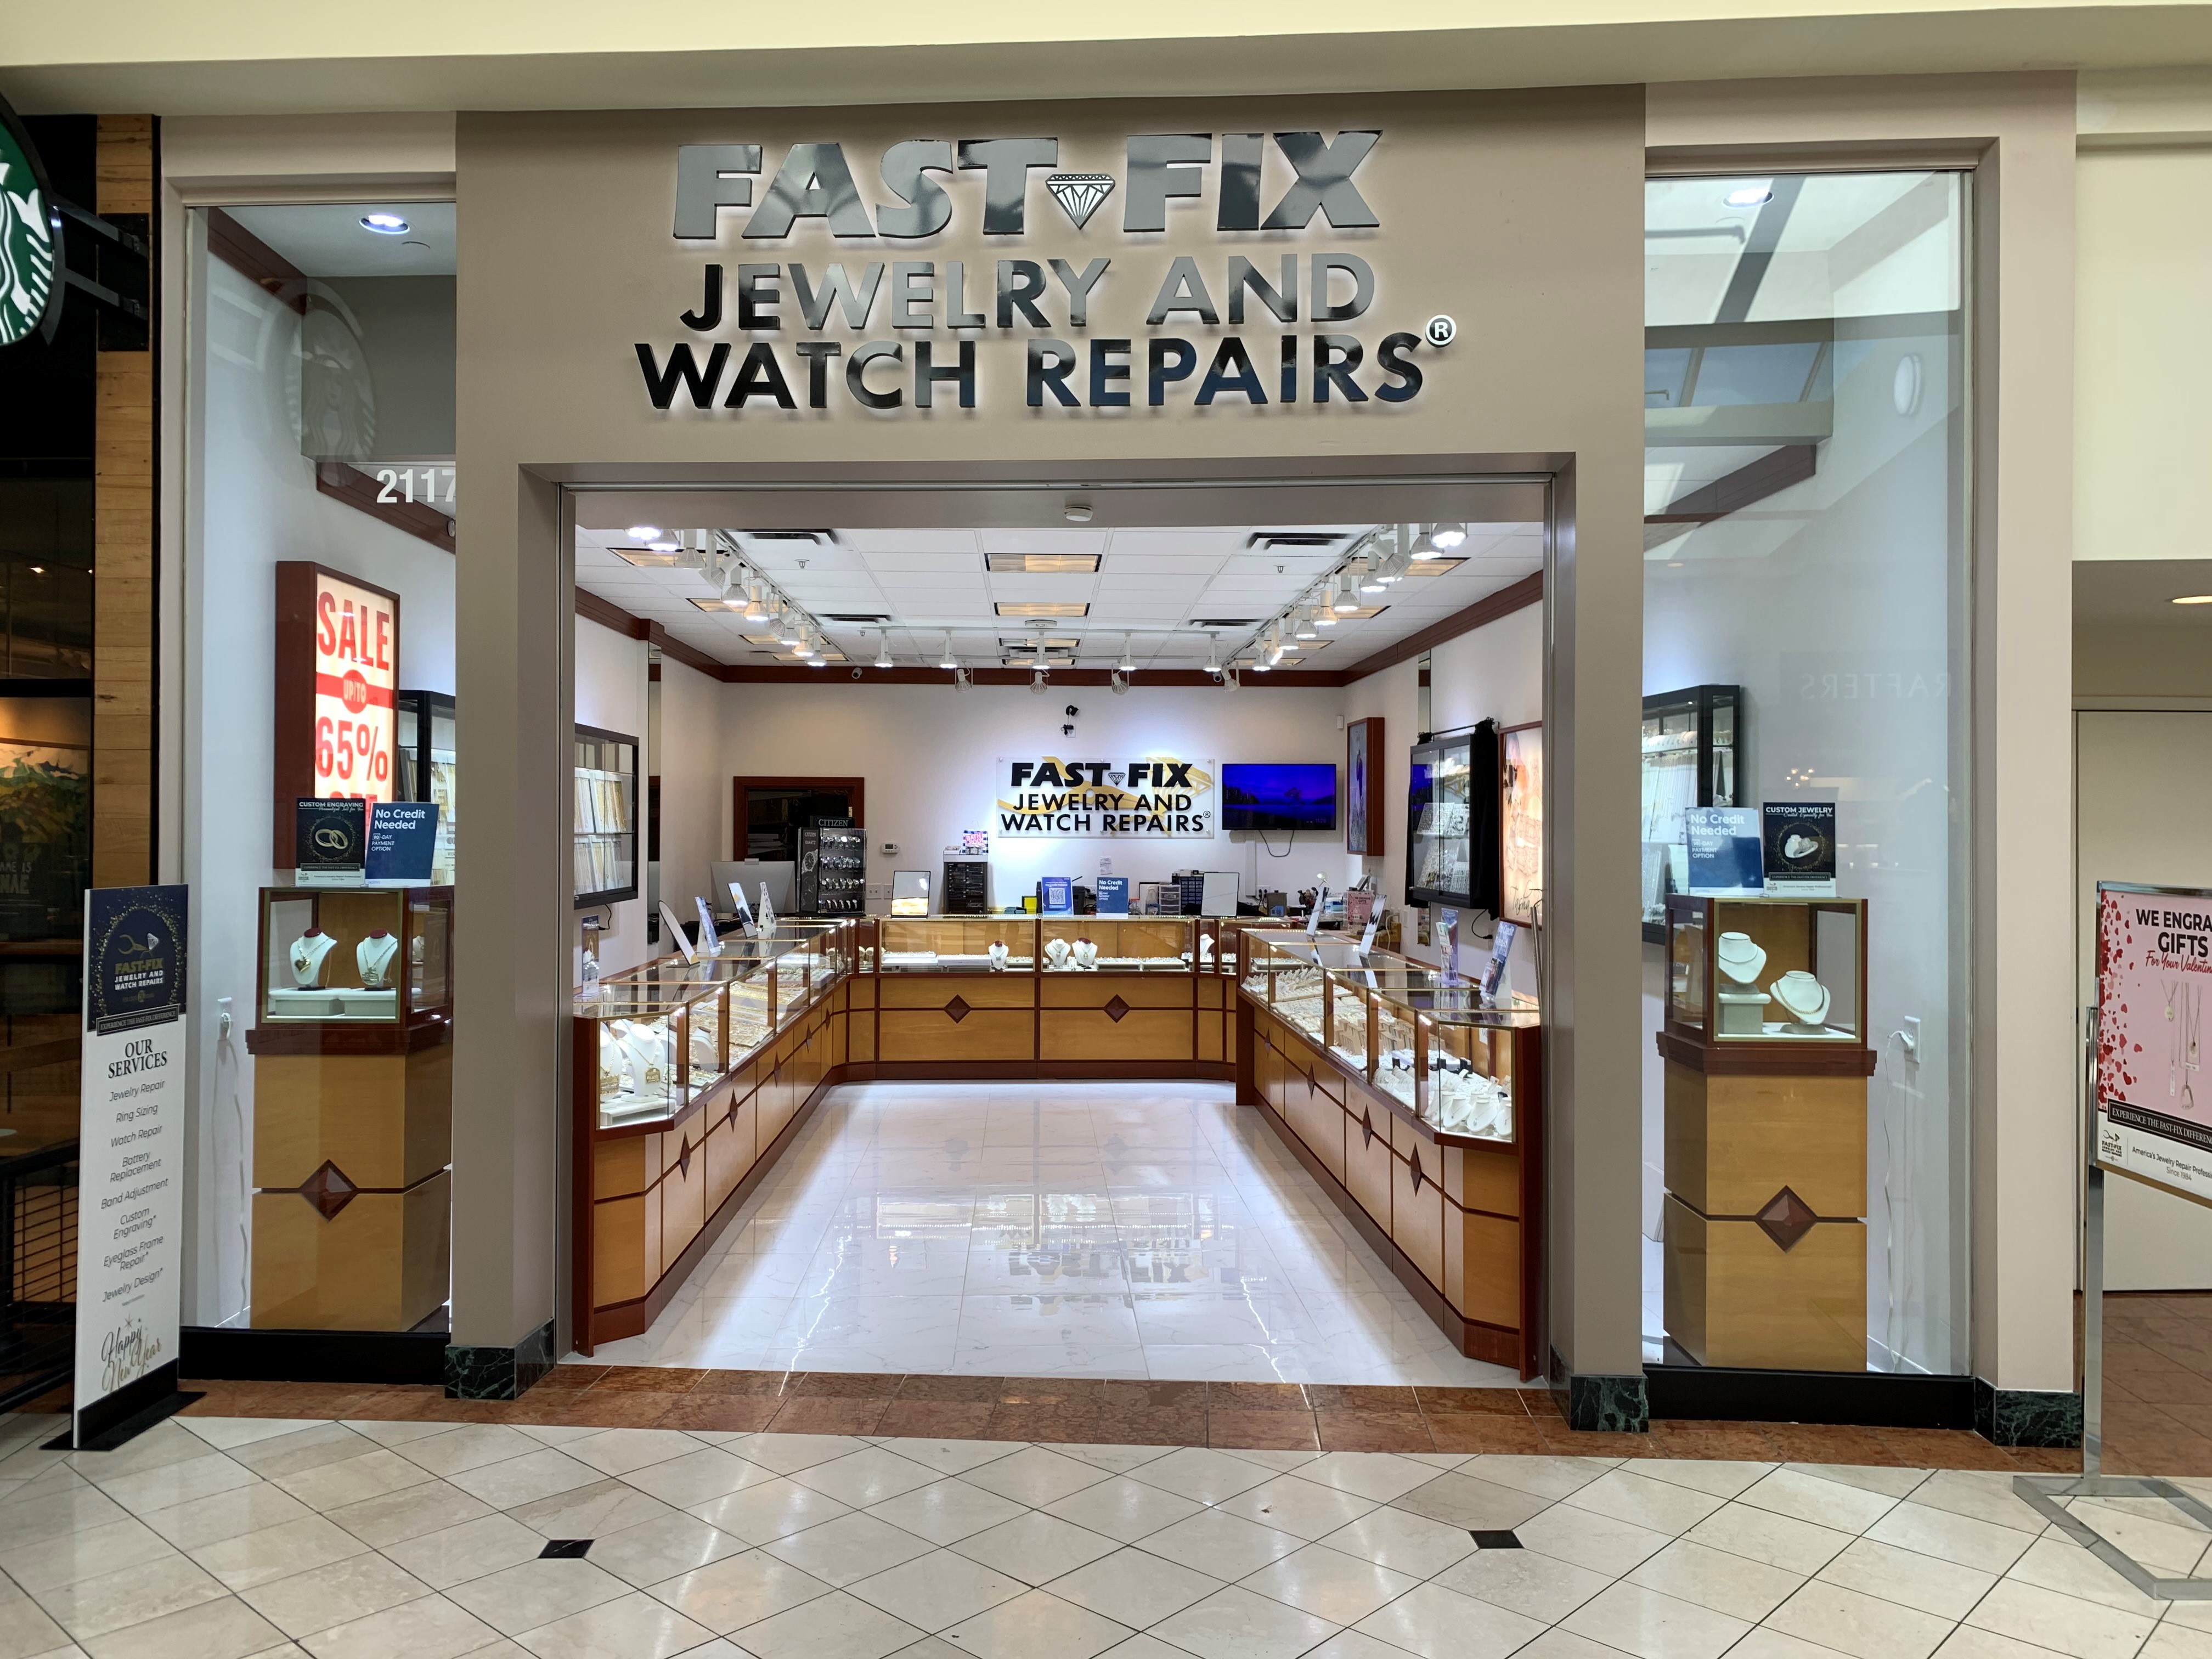 Storefront of Fast-Fix Jewelry and Watch Repairs store at Crabtree Valley Mall. Showcases are positioned in a U-form and lots of gold and diamond jewelry is displayed.